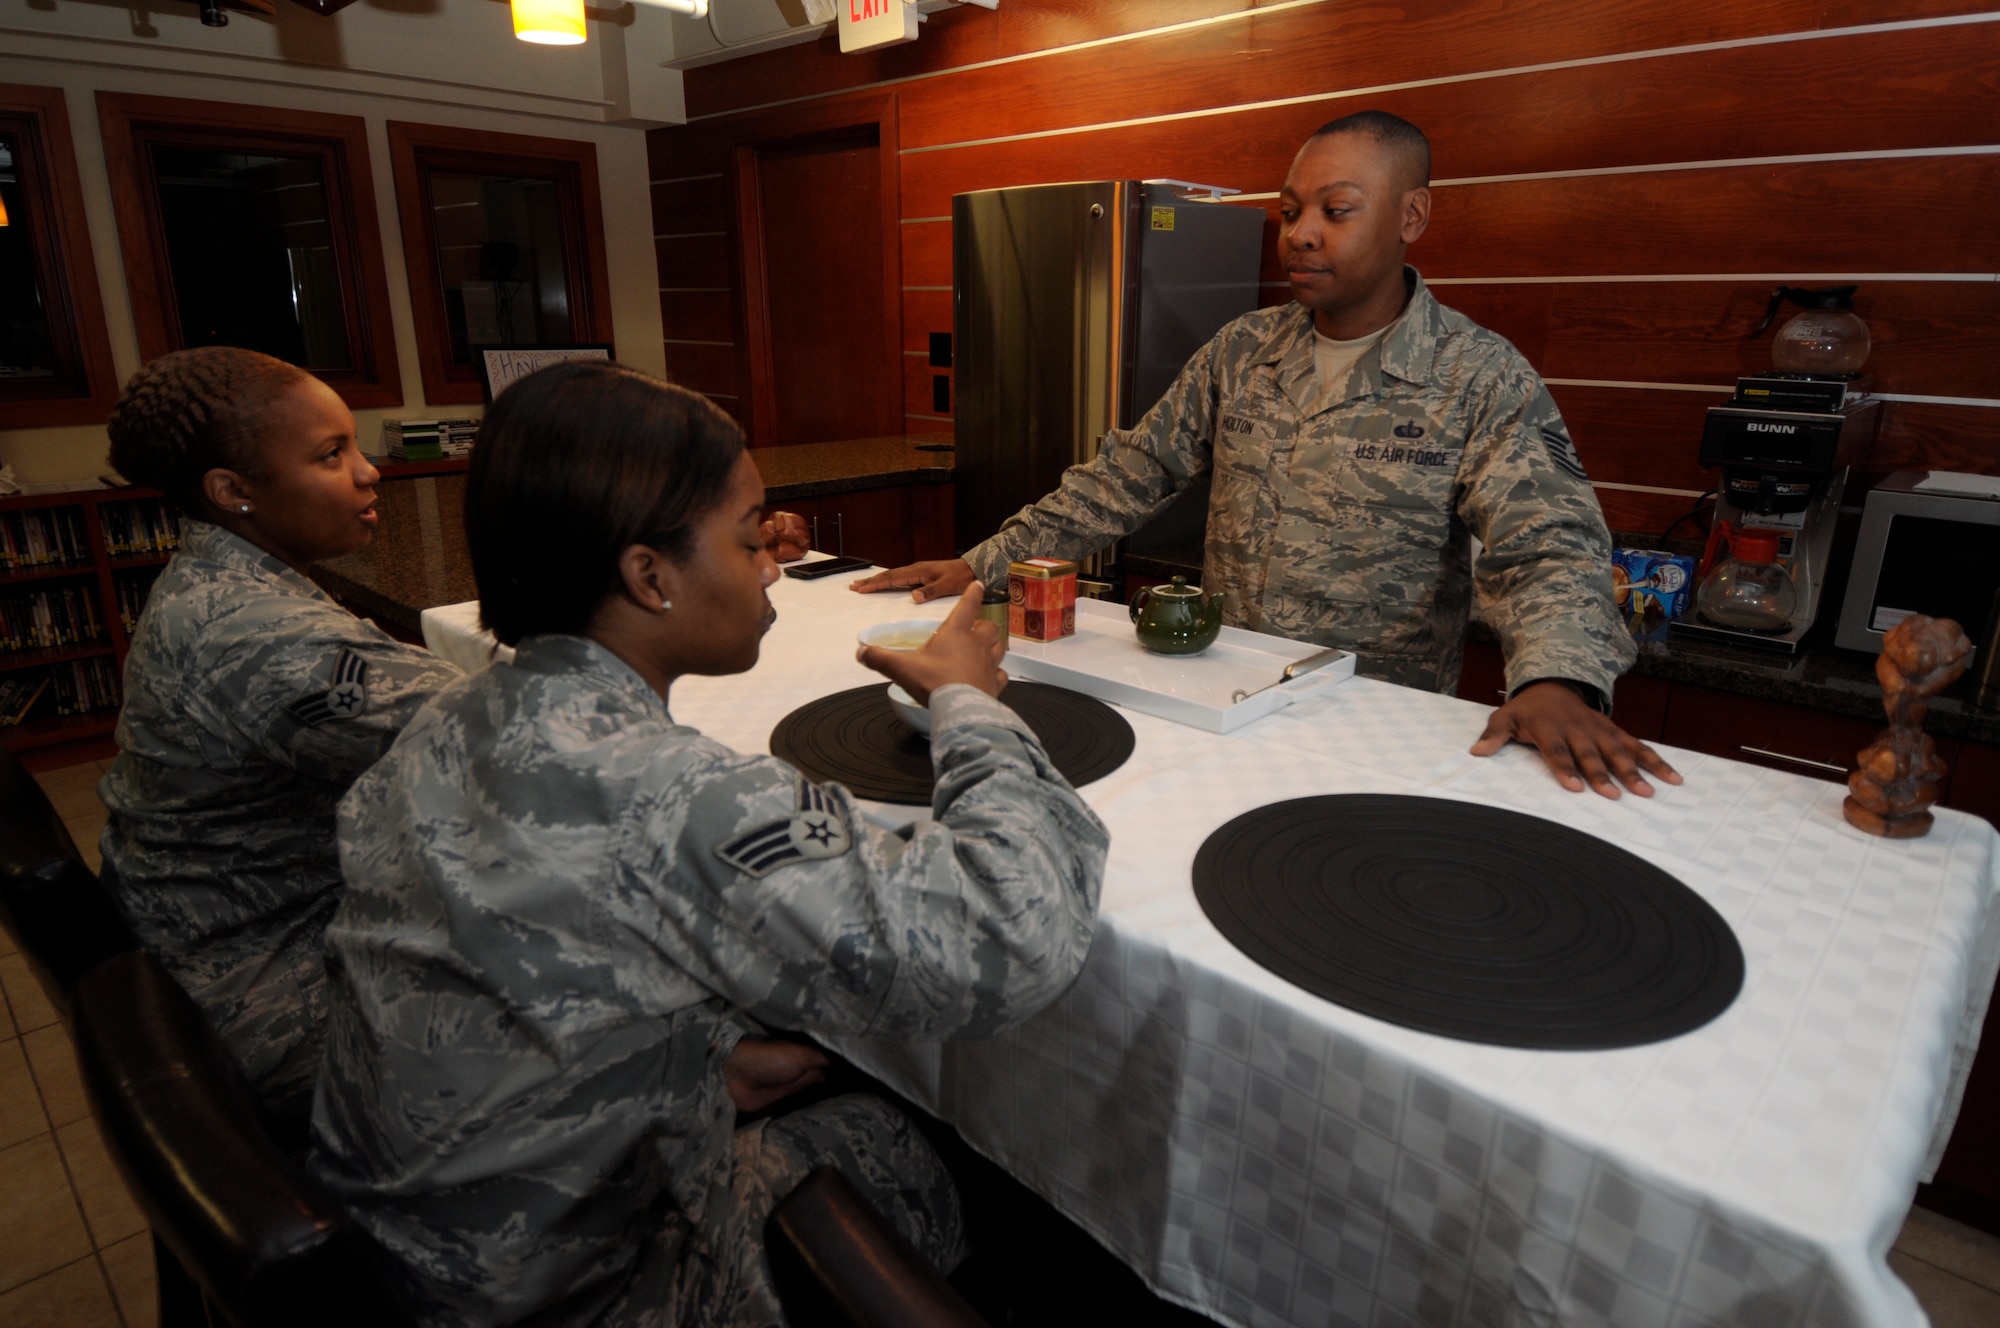 Tech. Sgt. Joseph Holton, 512th Memorial Affairs Squadron, watches as Senior Airmen Jaqe Wesley (left) and Tylisha Darling, 512th MAS, sample tea he made in the USO lounge of the Charles C. Carson Center for Mortuary Affairs, Dover Air Force Base, Del., Aug. 12, 2014. Holton shared tips on proper preparation and health benefits. Holton, Wesley and Darling are deployed to Air Force Mortuary Affairs Operations in support of the mortuary mission. (U.S. Air Force photo/Master Sgt. Christopher Gish)